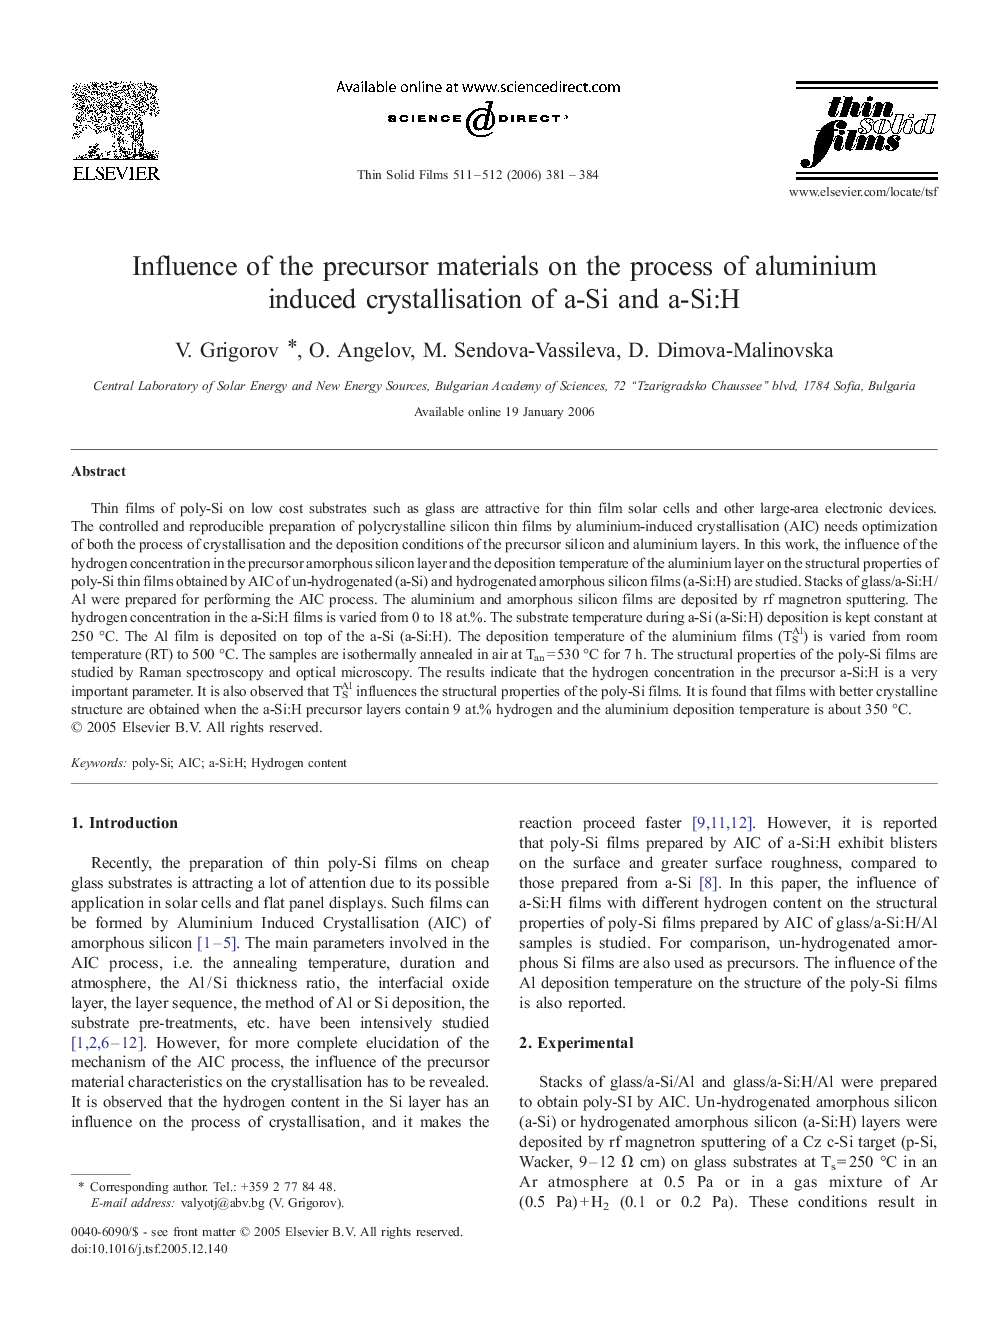 Influence of the precursor materials on the process of aluminium induced crystallisation of a-Si and a-Si:H